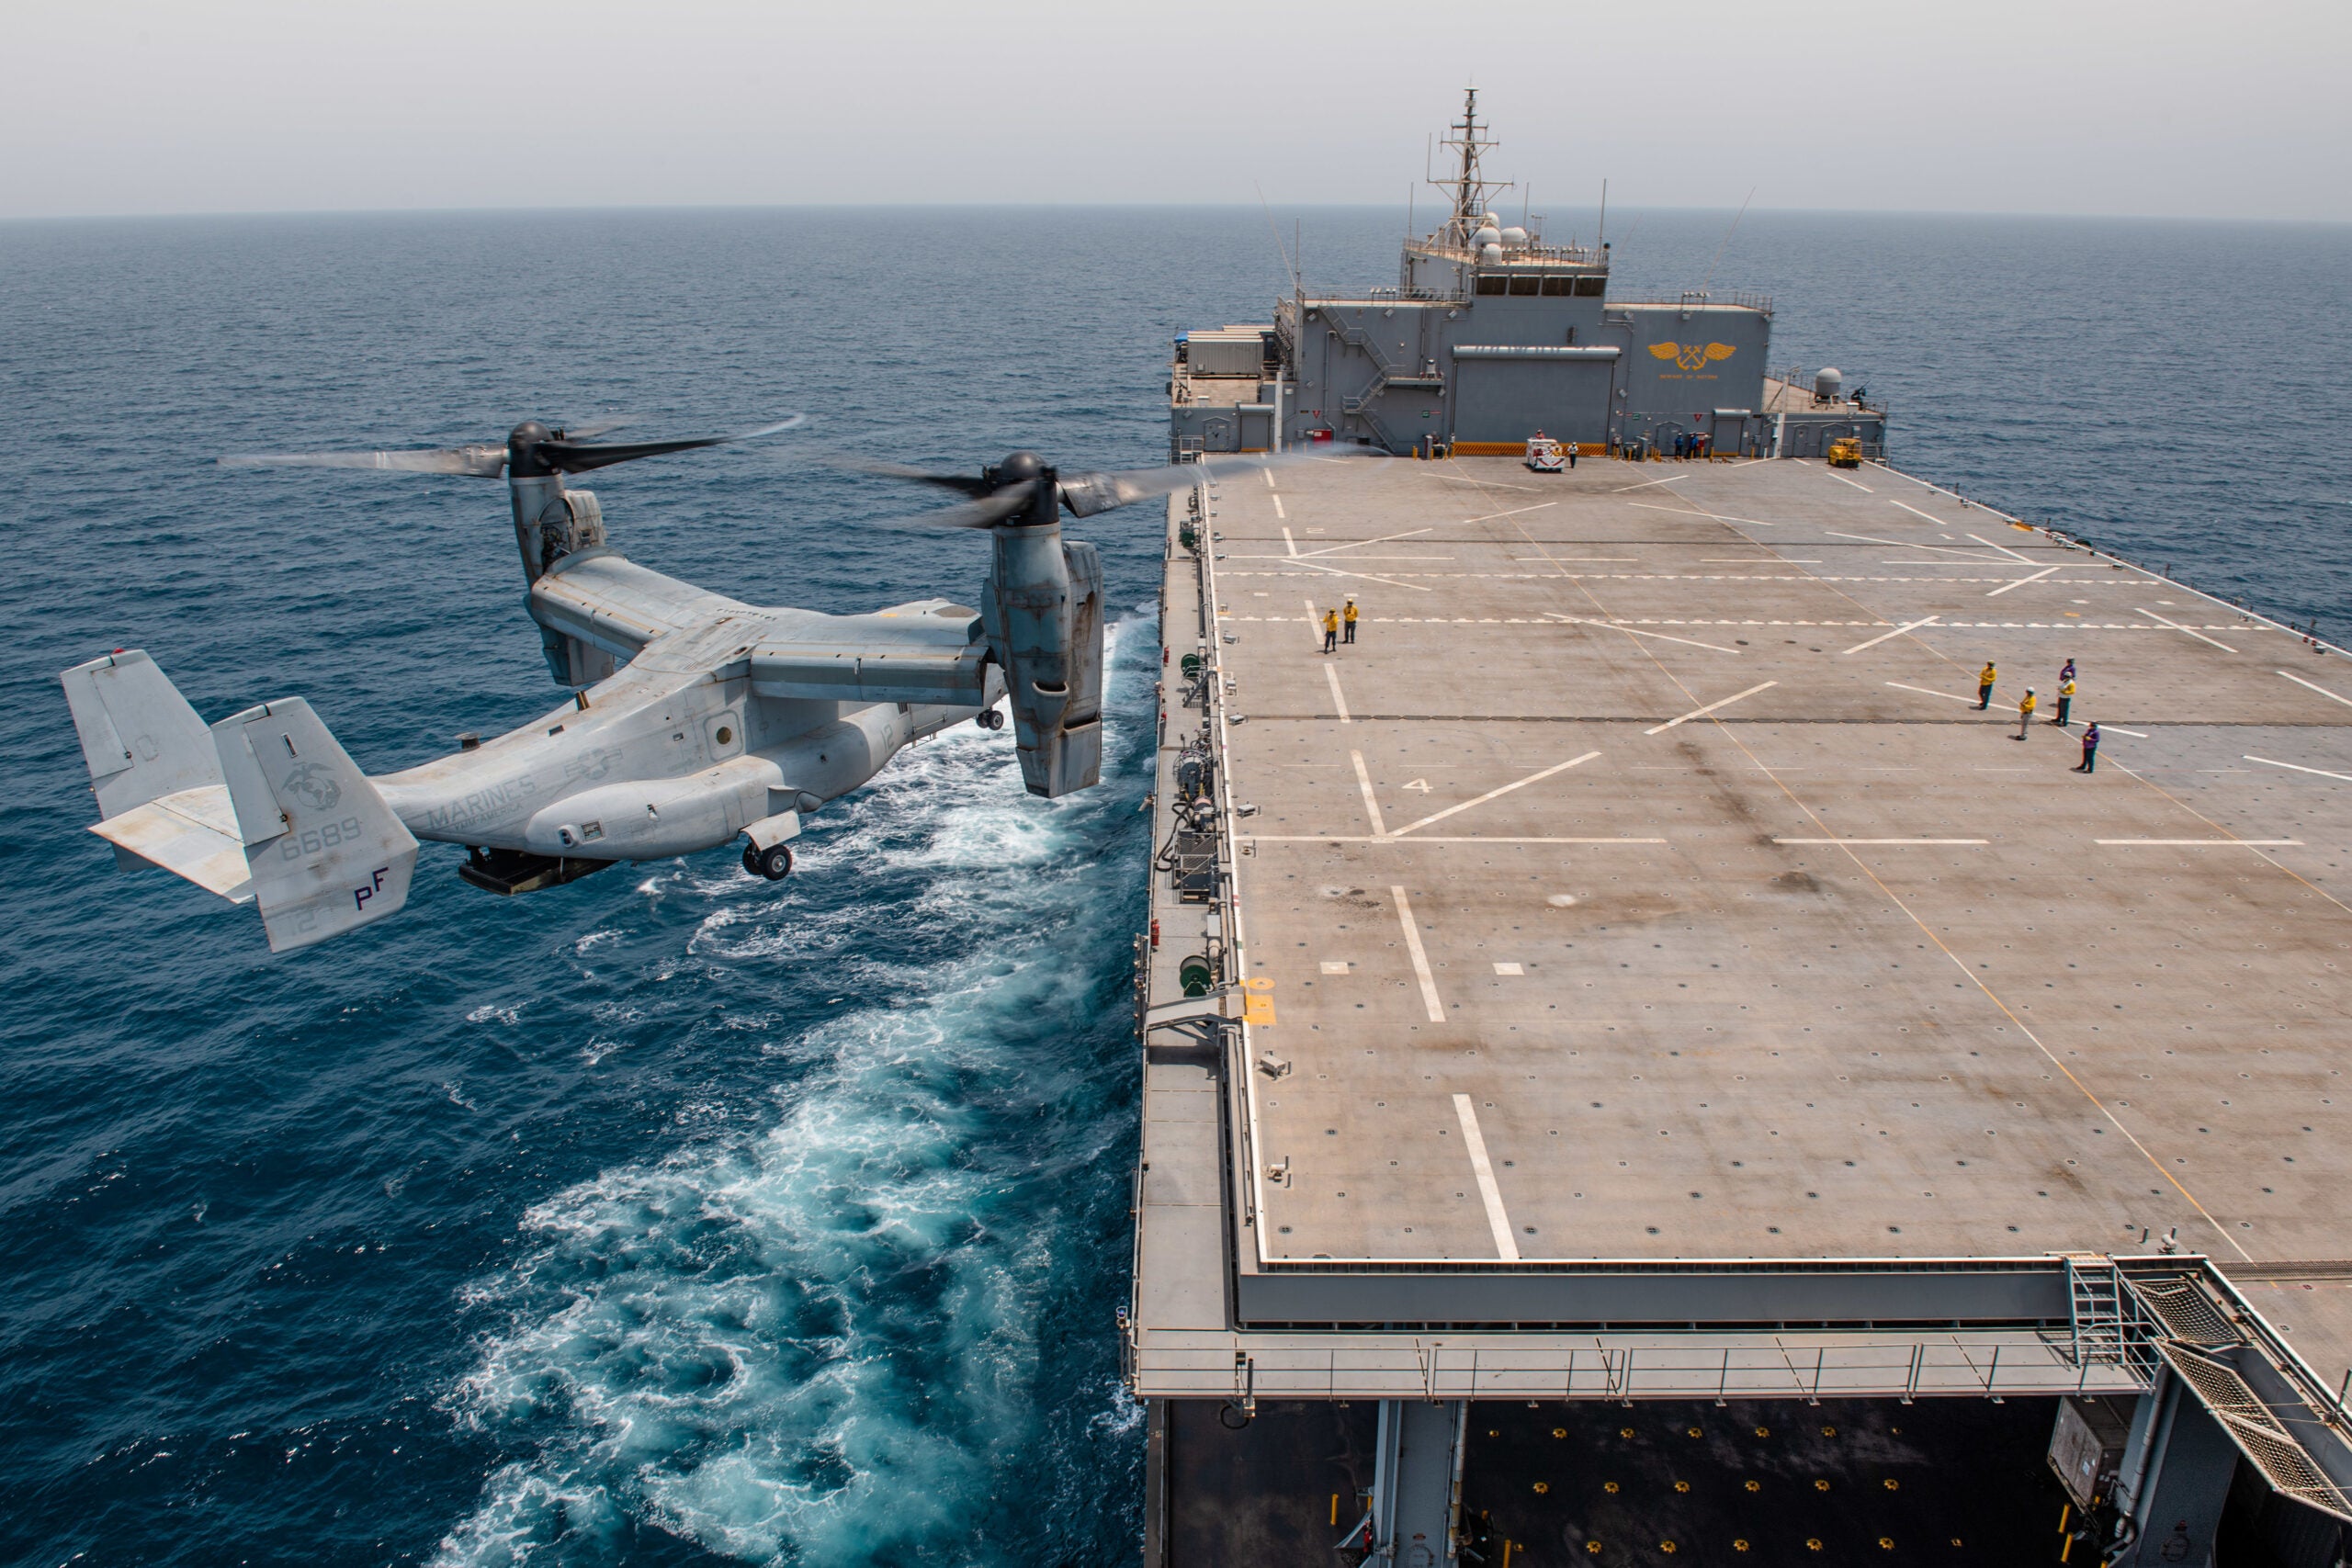 210716-N-KZ419-1575 ARABIAN GULF (July 16, 2021) – An MV22 Osprey helicopter attached to Task Force 51/5 prepares to land aboard expeditionary sea base USS Lewis B. Puller (ESB 3), during flight operations in the Arabian Gulf, July 16. Lewis B. Puller is deployed to the U.S. 5th Fleet area of operations in support of naval operations to ensure maritime stability and security in the Central Region, connecting the Mediterranean and Pacific through the Western Indian Ocean and three strategic choke points. (U.S. Navy photo by Mass Communication Specialist 2nd Class Dawson Roth)